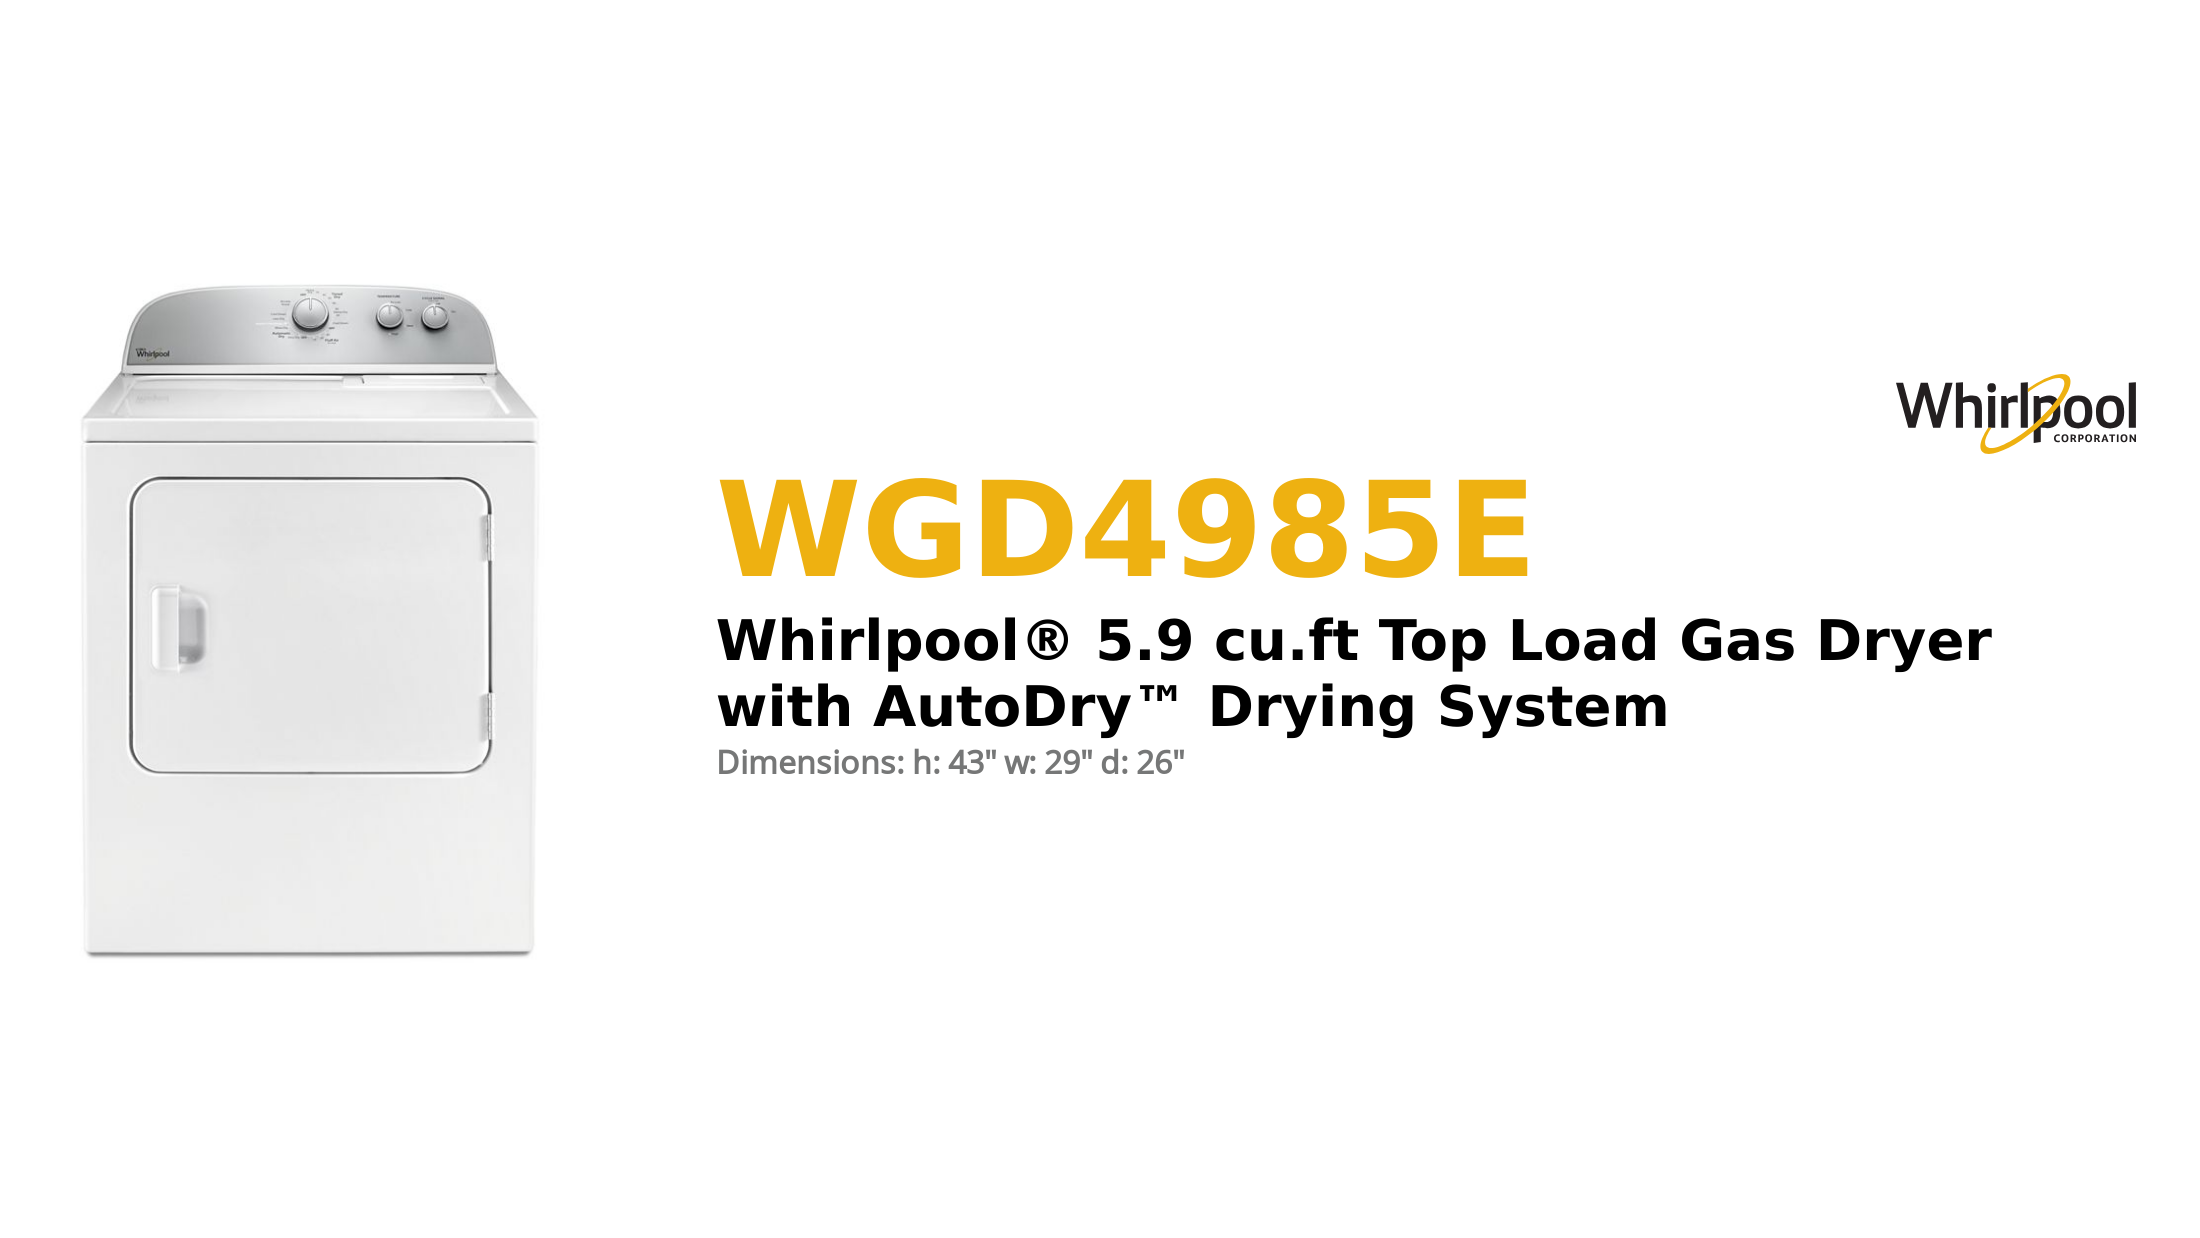 Whirlpool® 5.9 cu.ft Top Load Gas Dryer with AutoDry™ Drying System
 